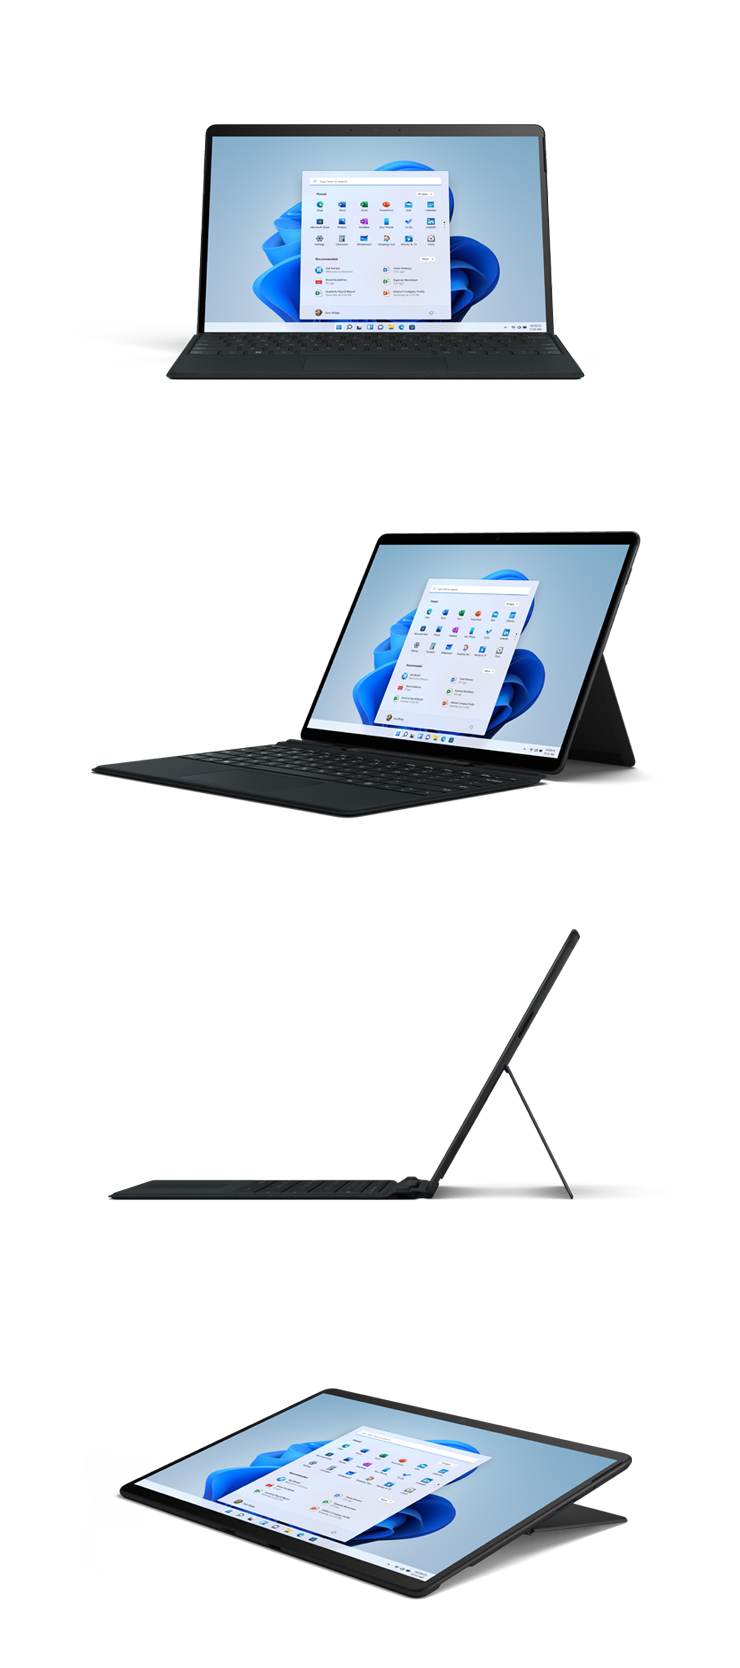 Renders of Black Surface Pro X from straight on, angled, side view and studio mode.